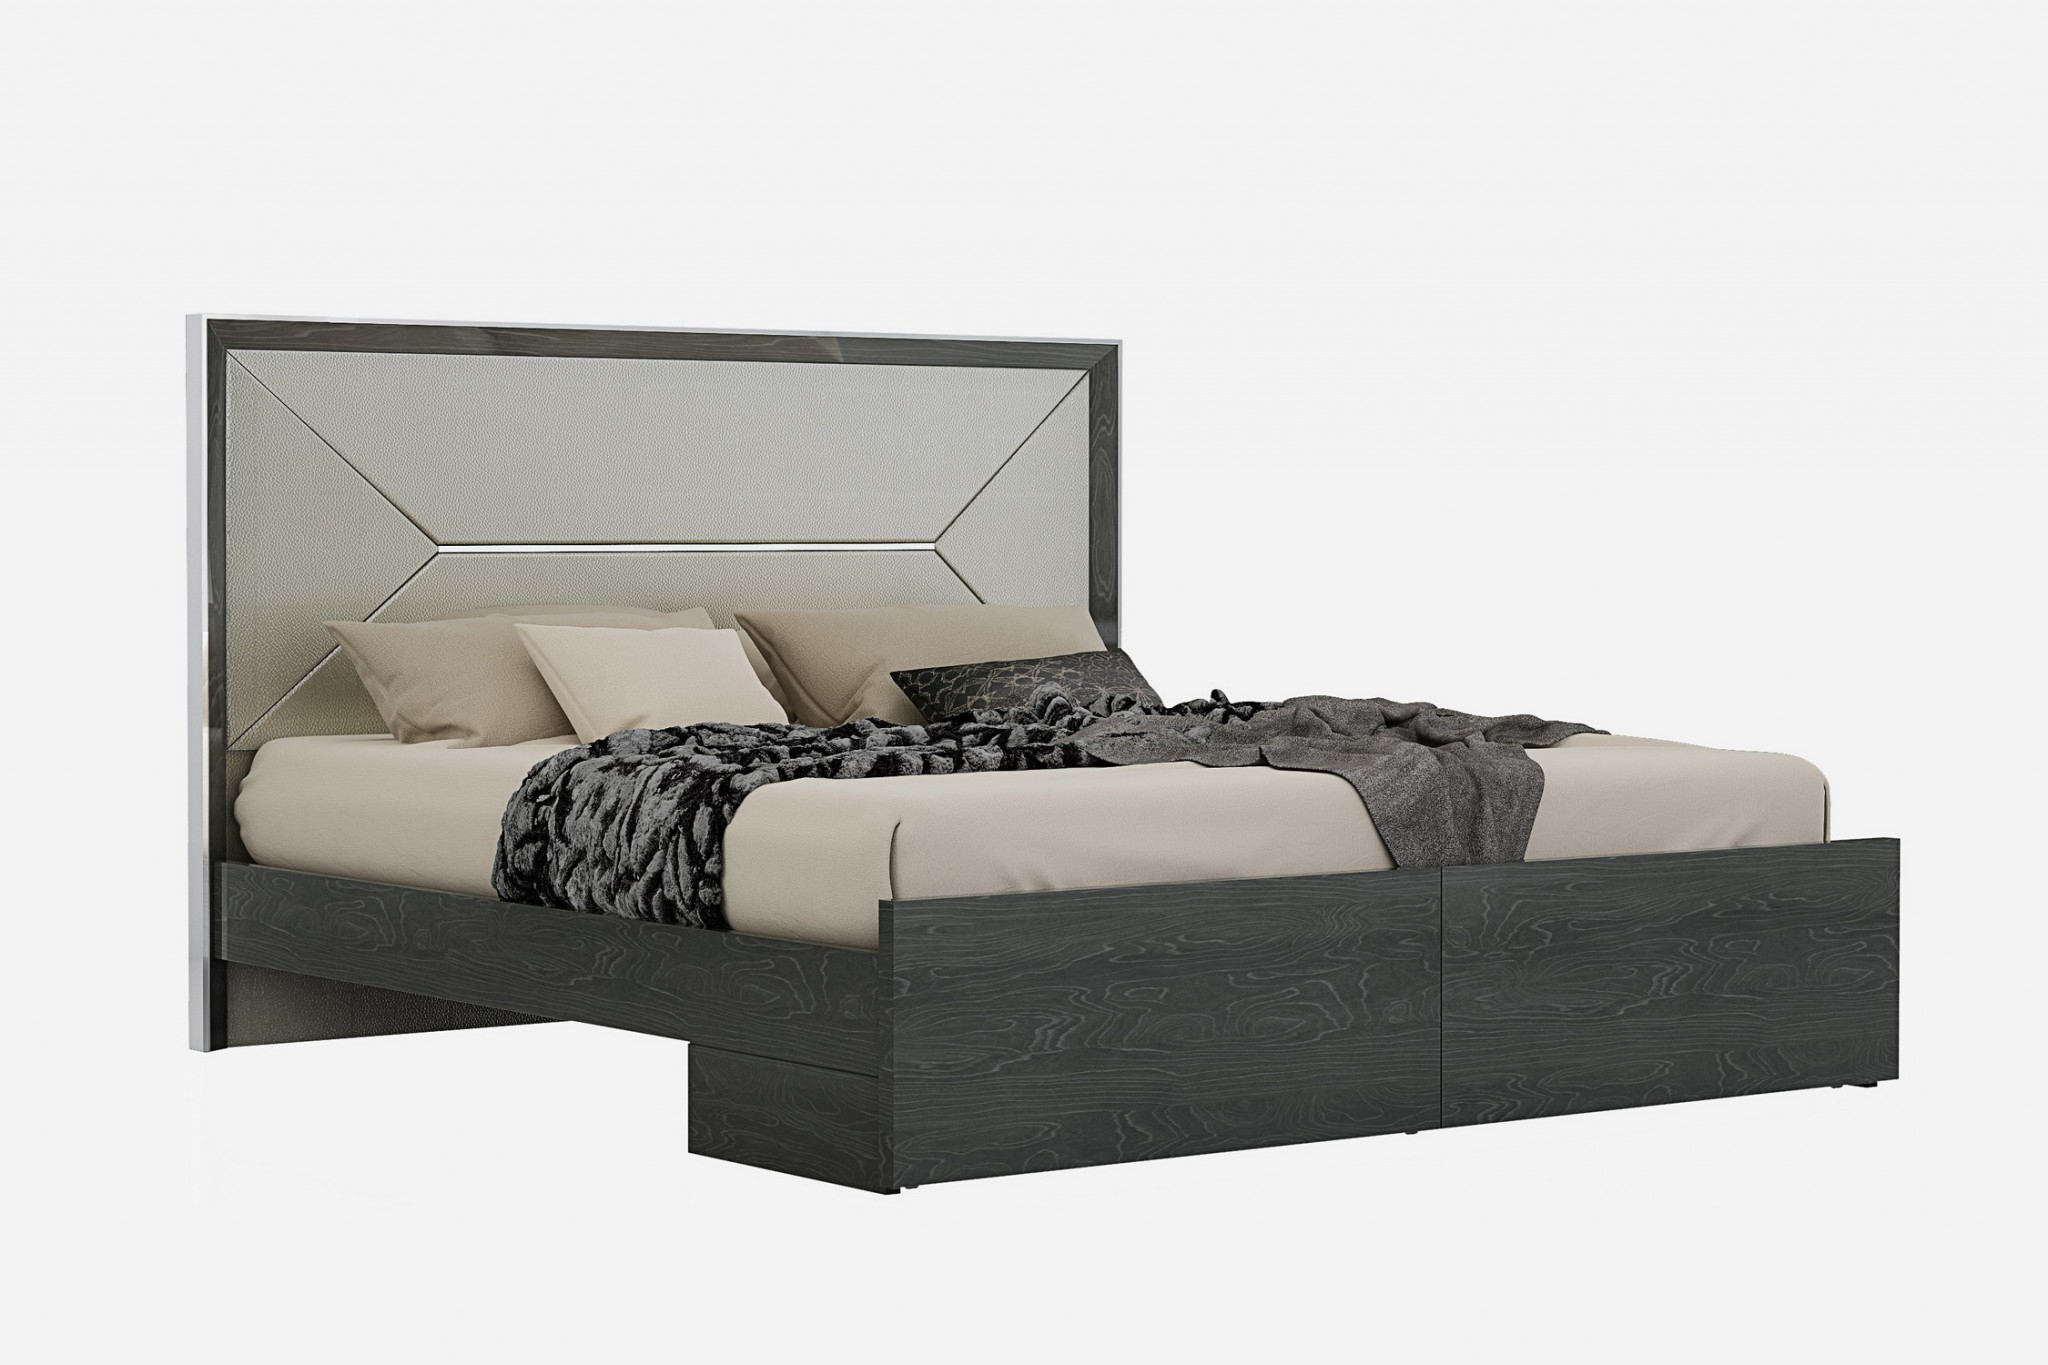 76" X 80" X 51" Grey Faux Leather King Bed